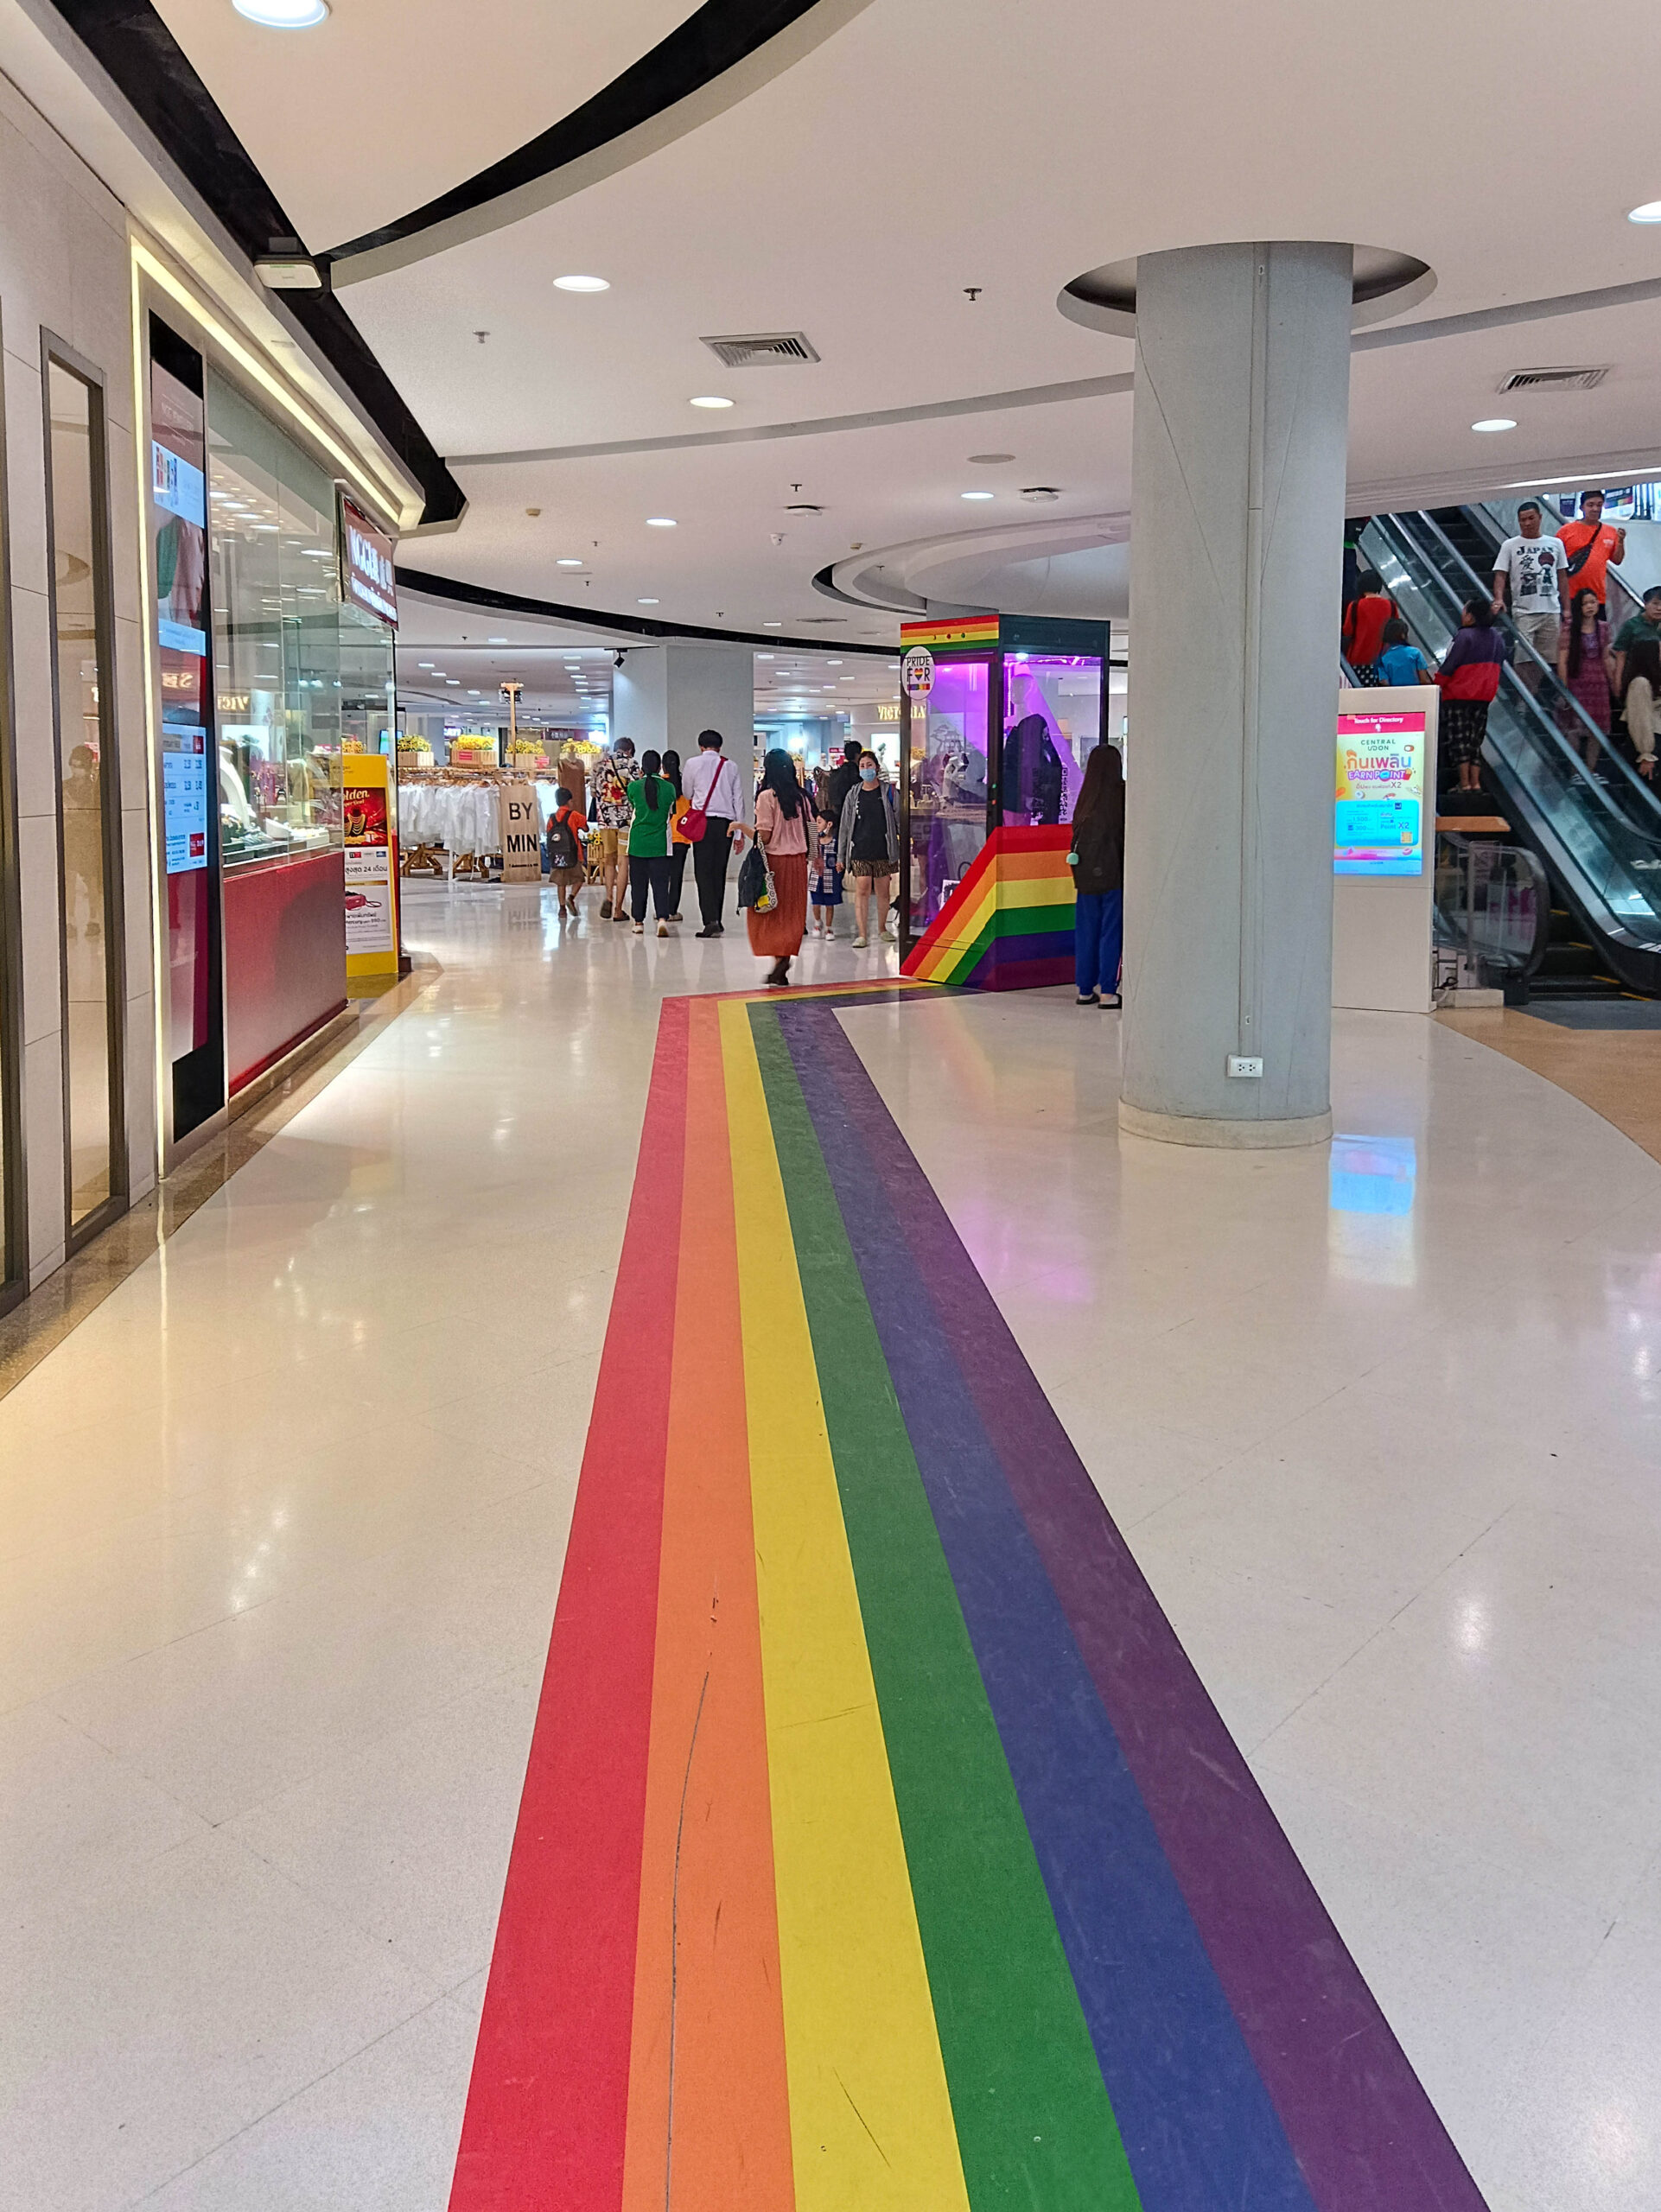 Pride celebration at Central Udon shopping mall, Udon Thani